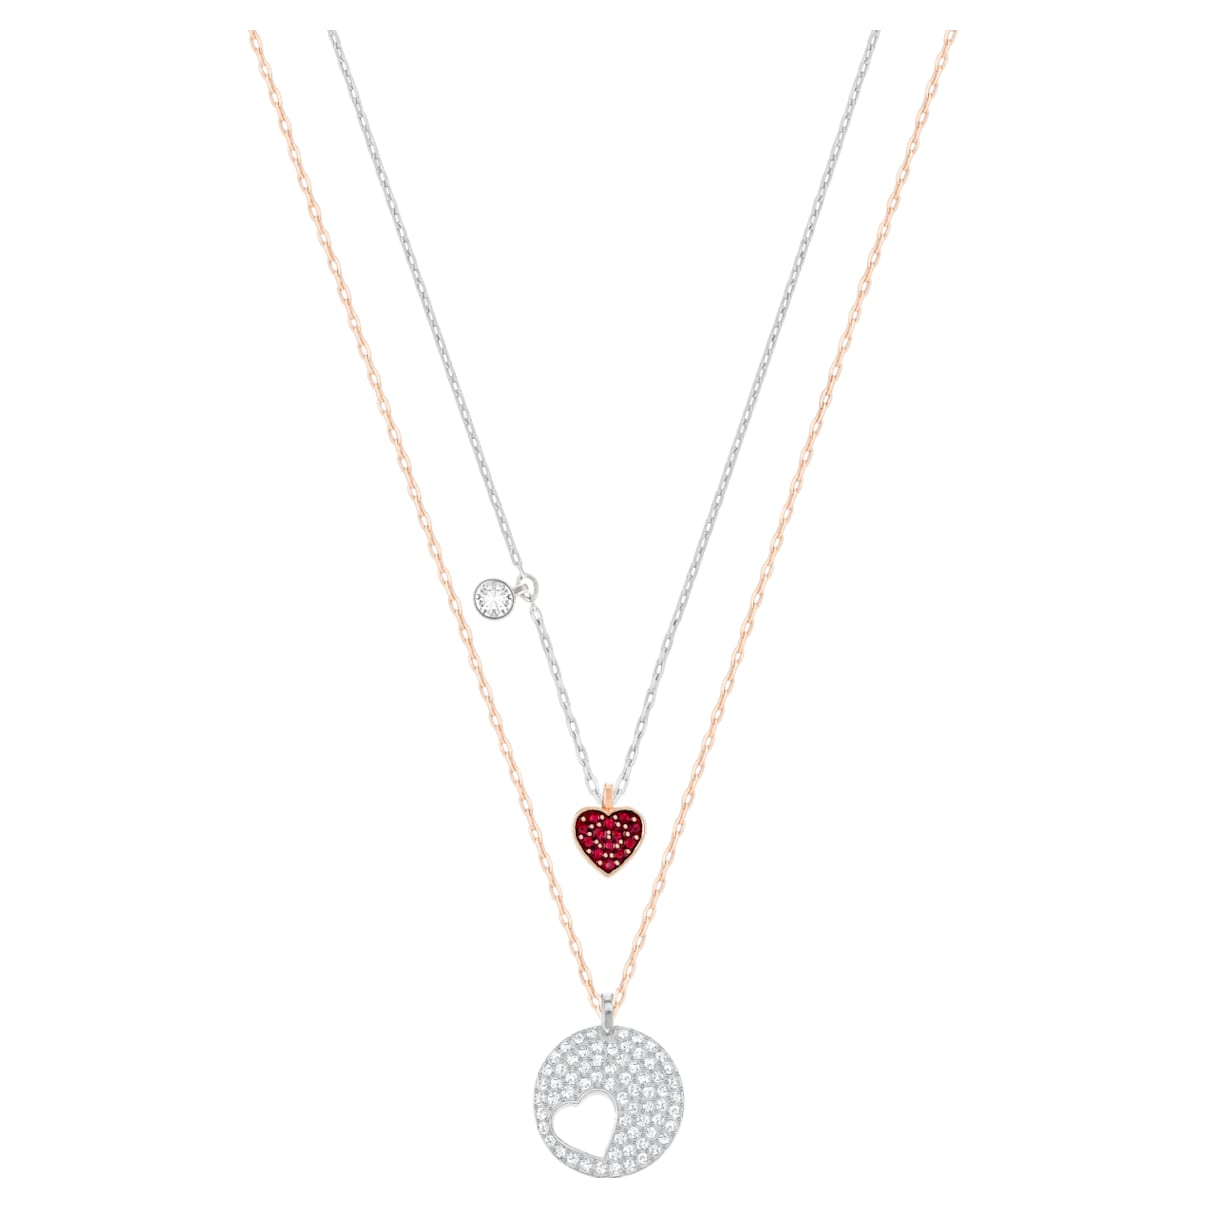 Pendente Crystal Wishes Heart, rosso, Mix di placcature